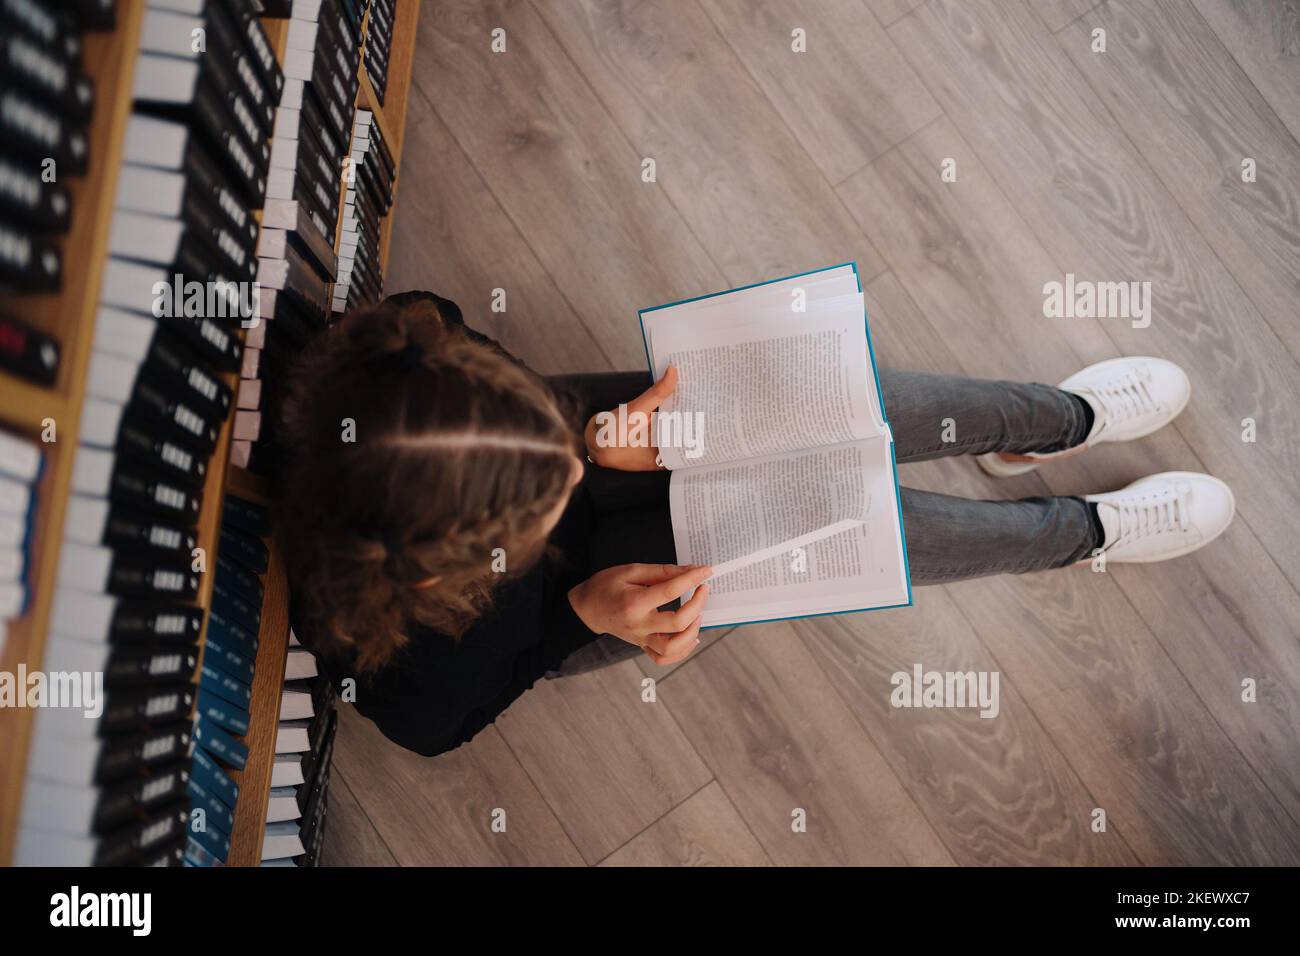 Teen girl among a pile of books. A young girl wearing glasses reads a book with shelves in the background. She is surrounded by stacks of books. Book Stock Photo